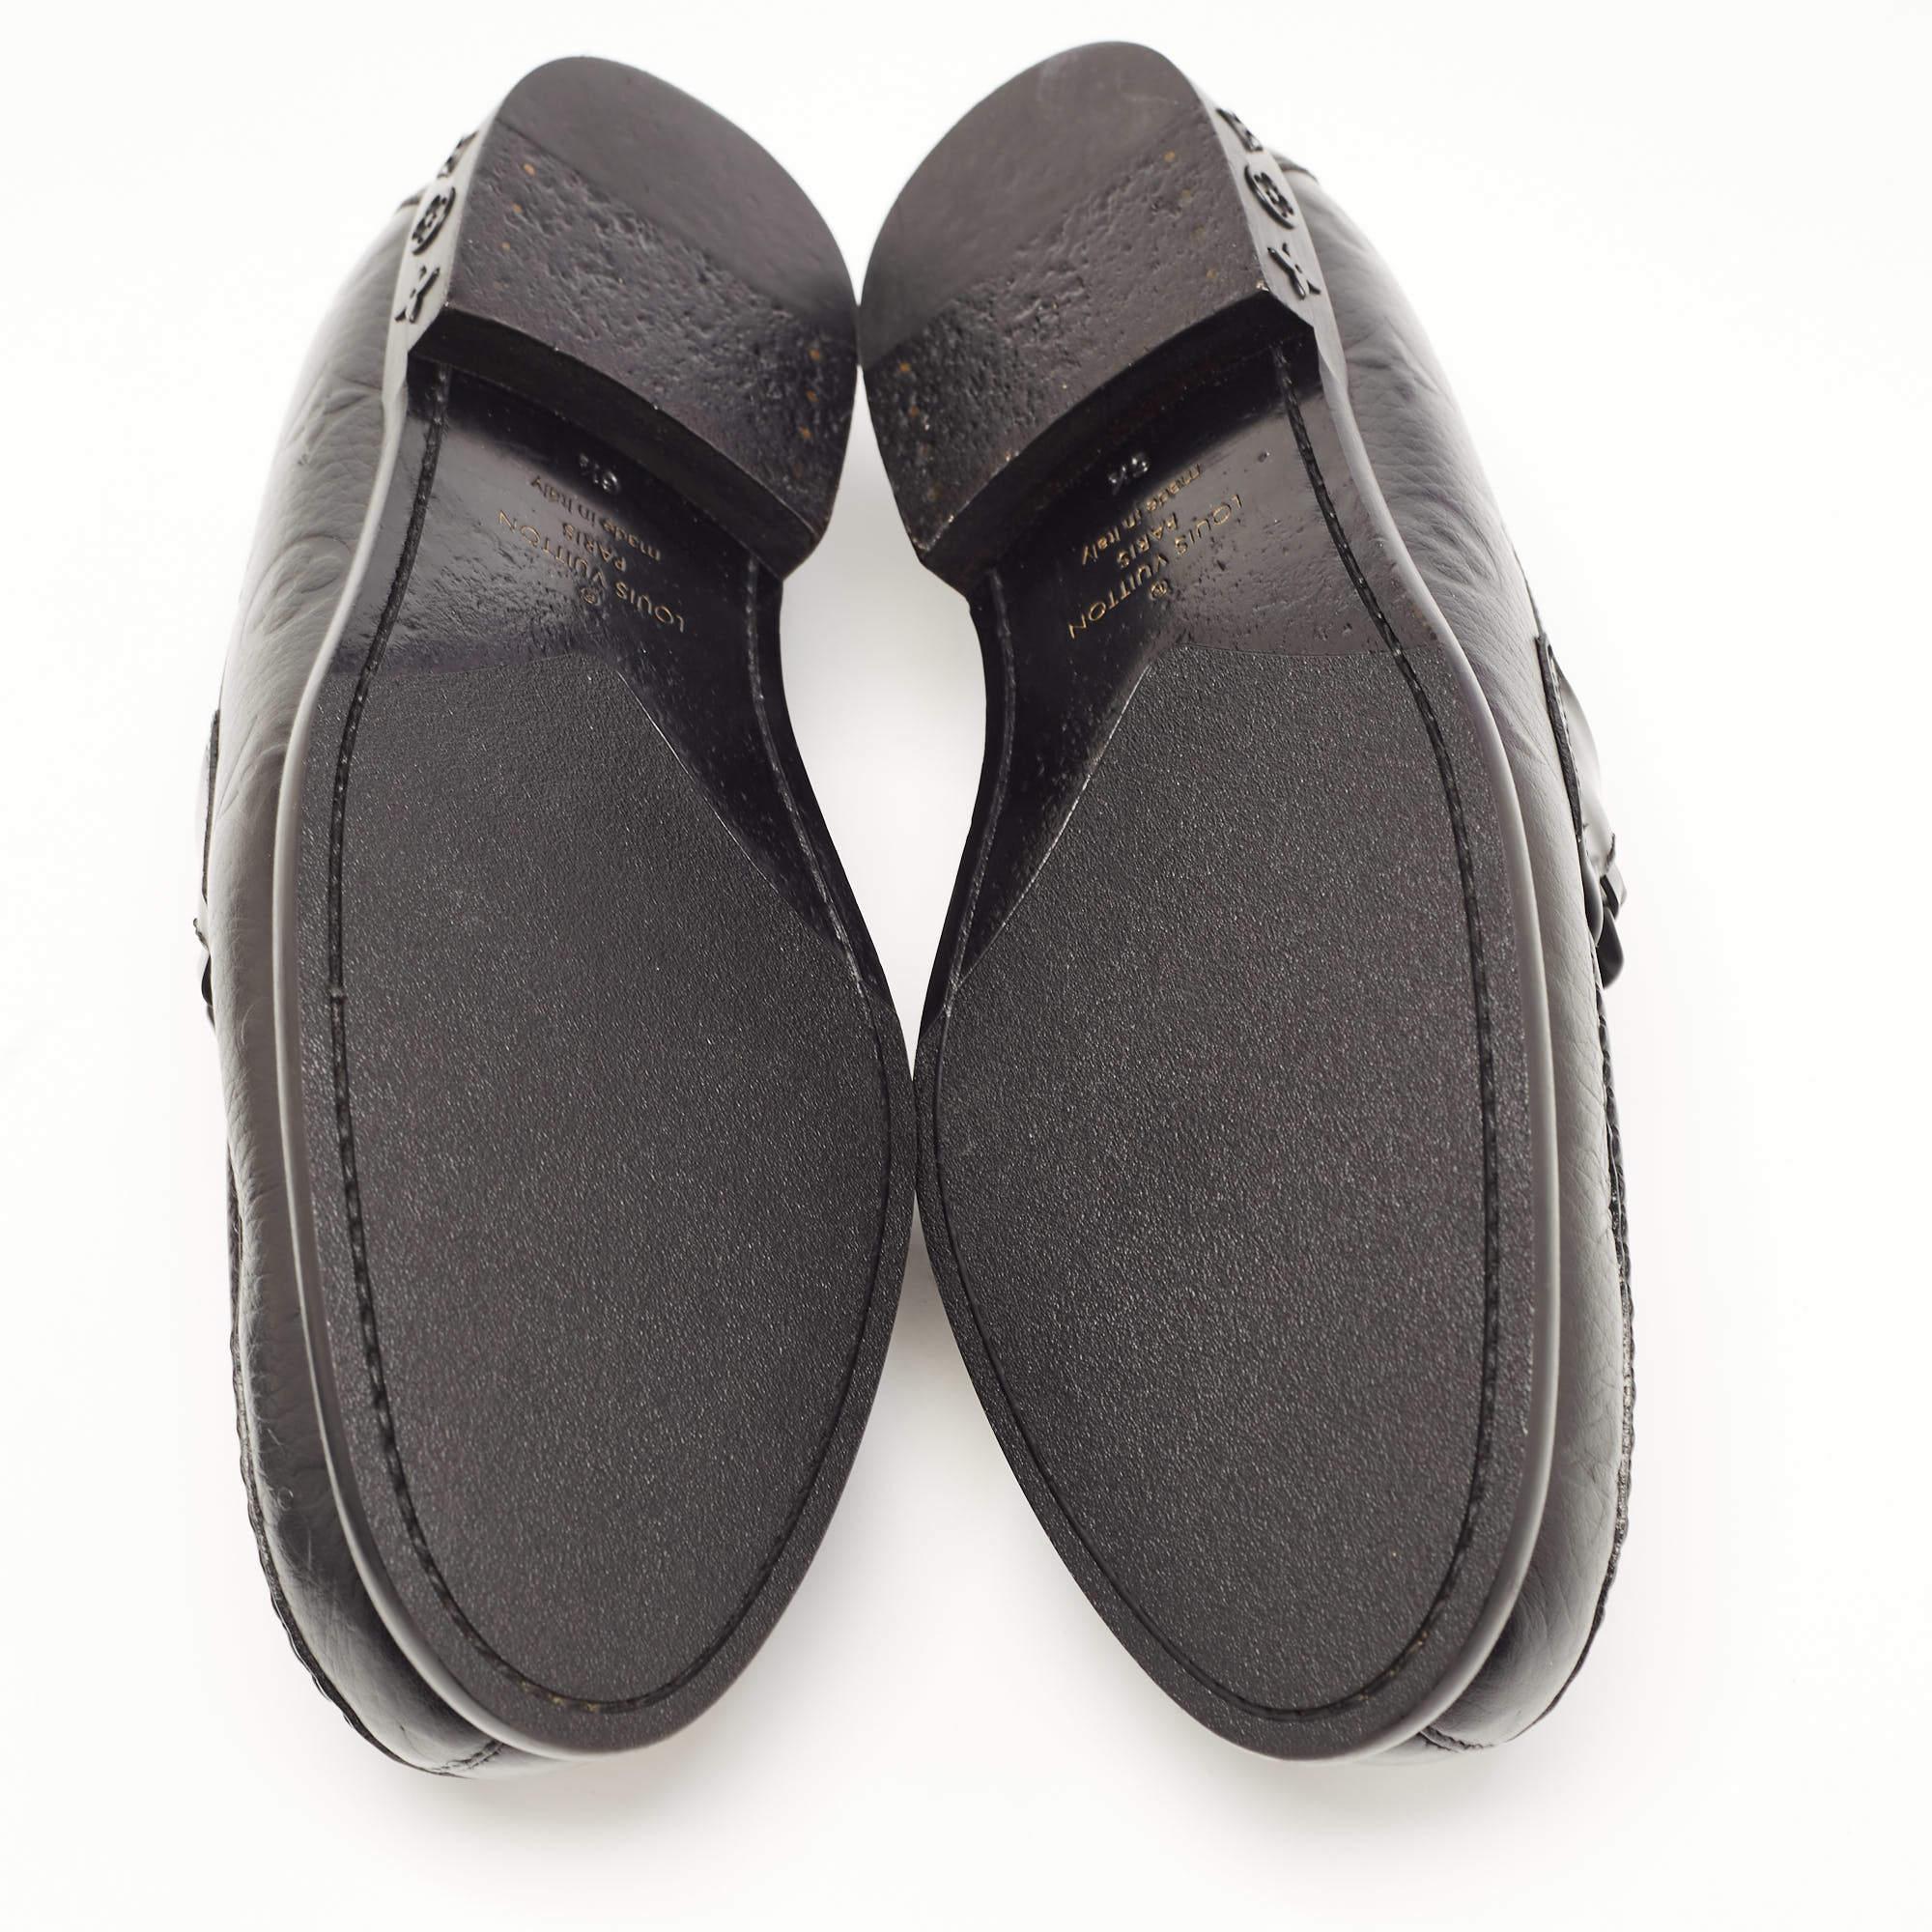 Louis Vuitton Black Leather Slip On Loafers Size 40.5 4